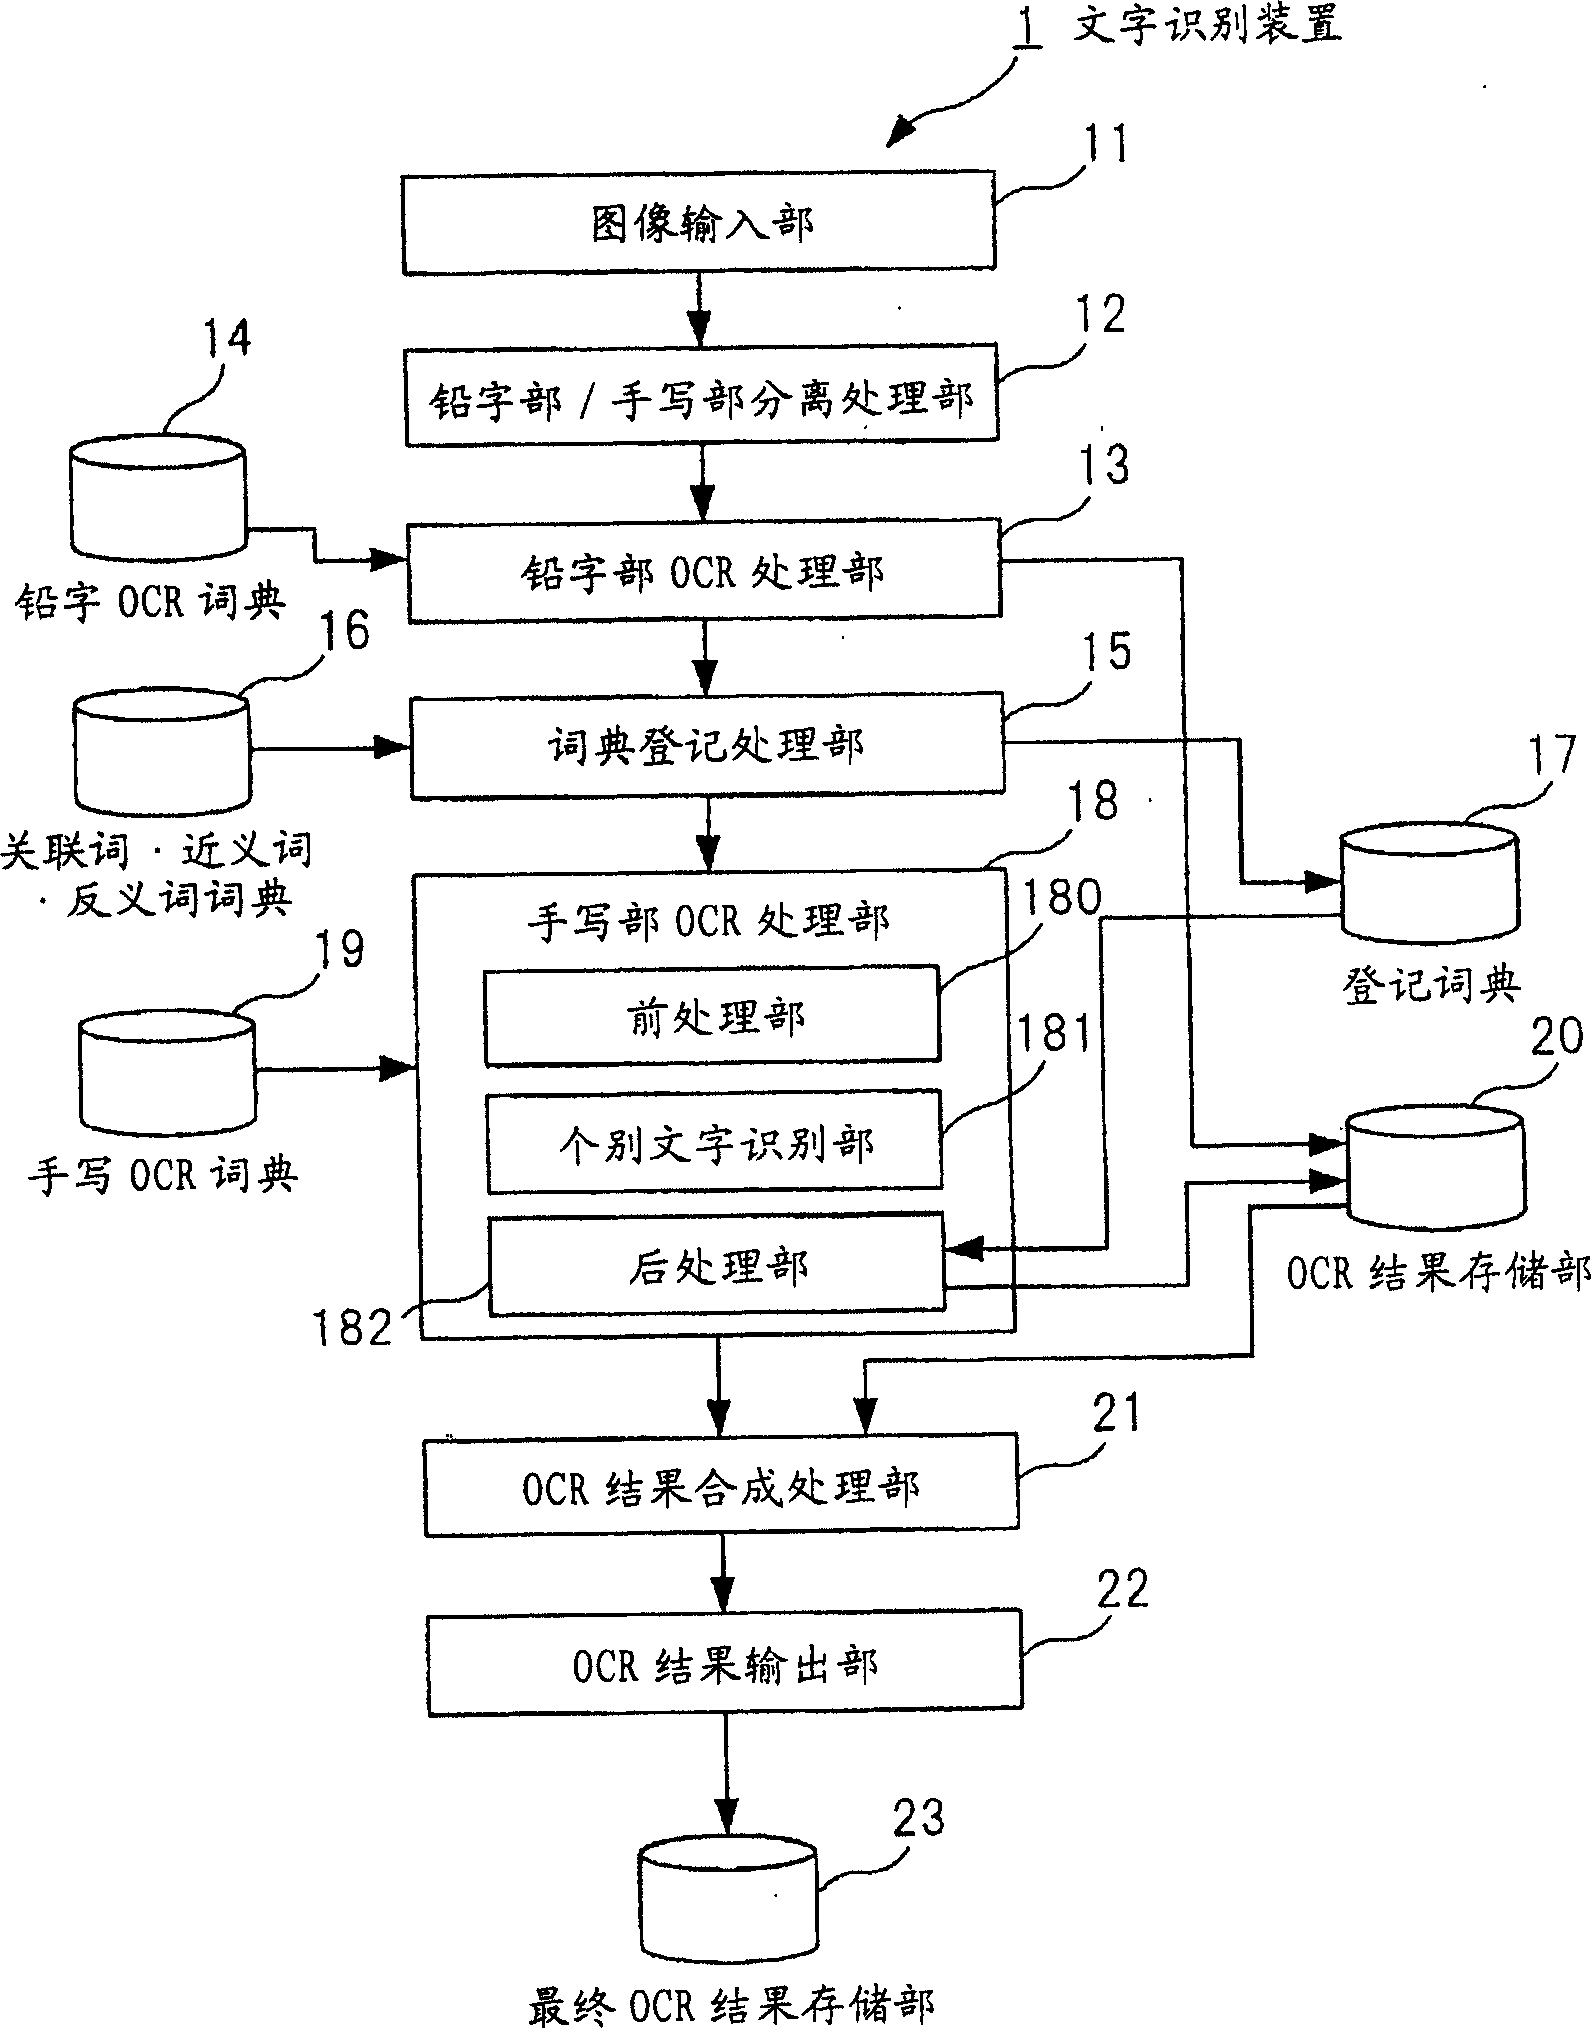 Character recognition apparatus, character recognition method, and character recognition program